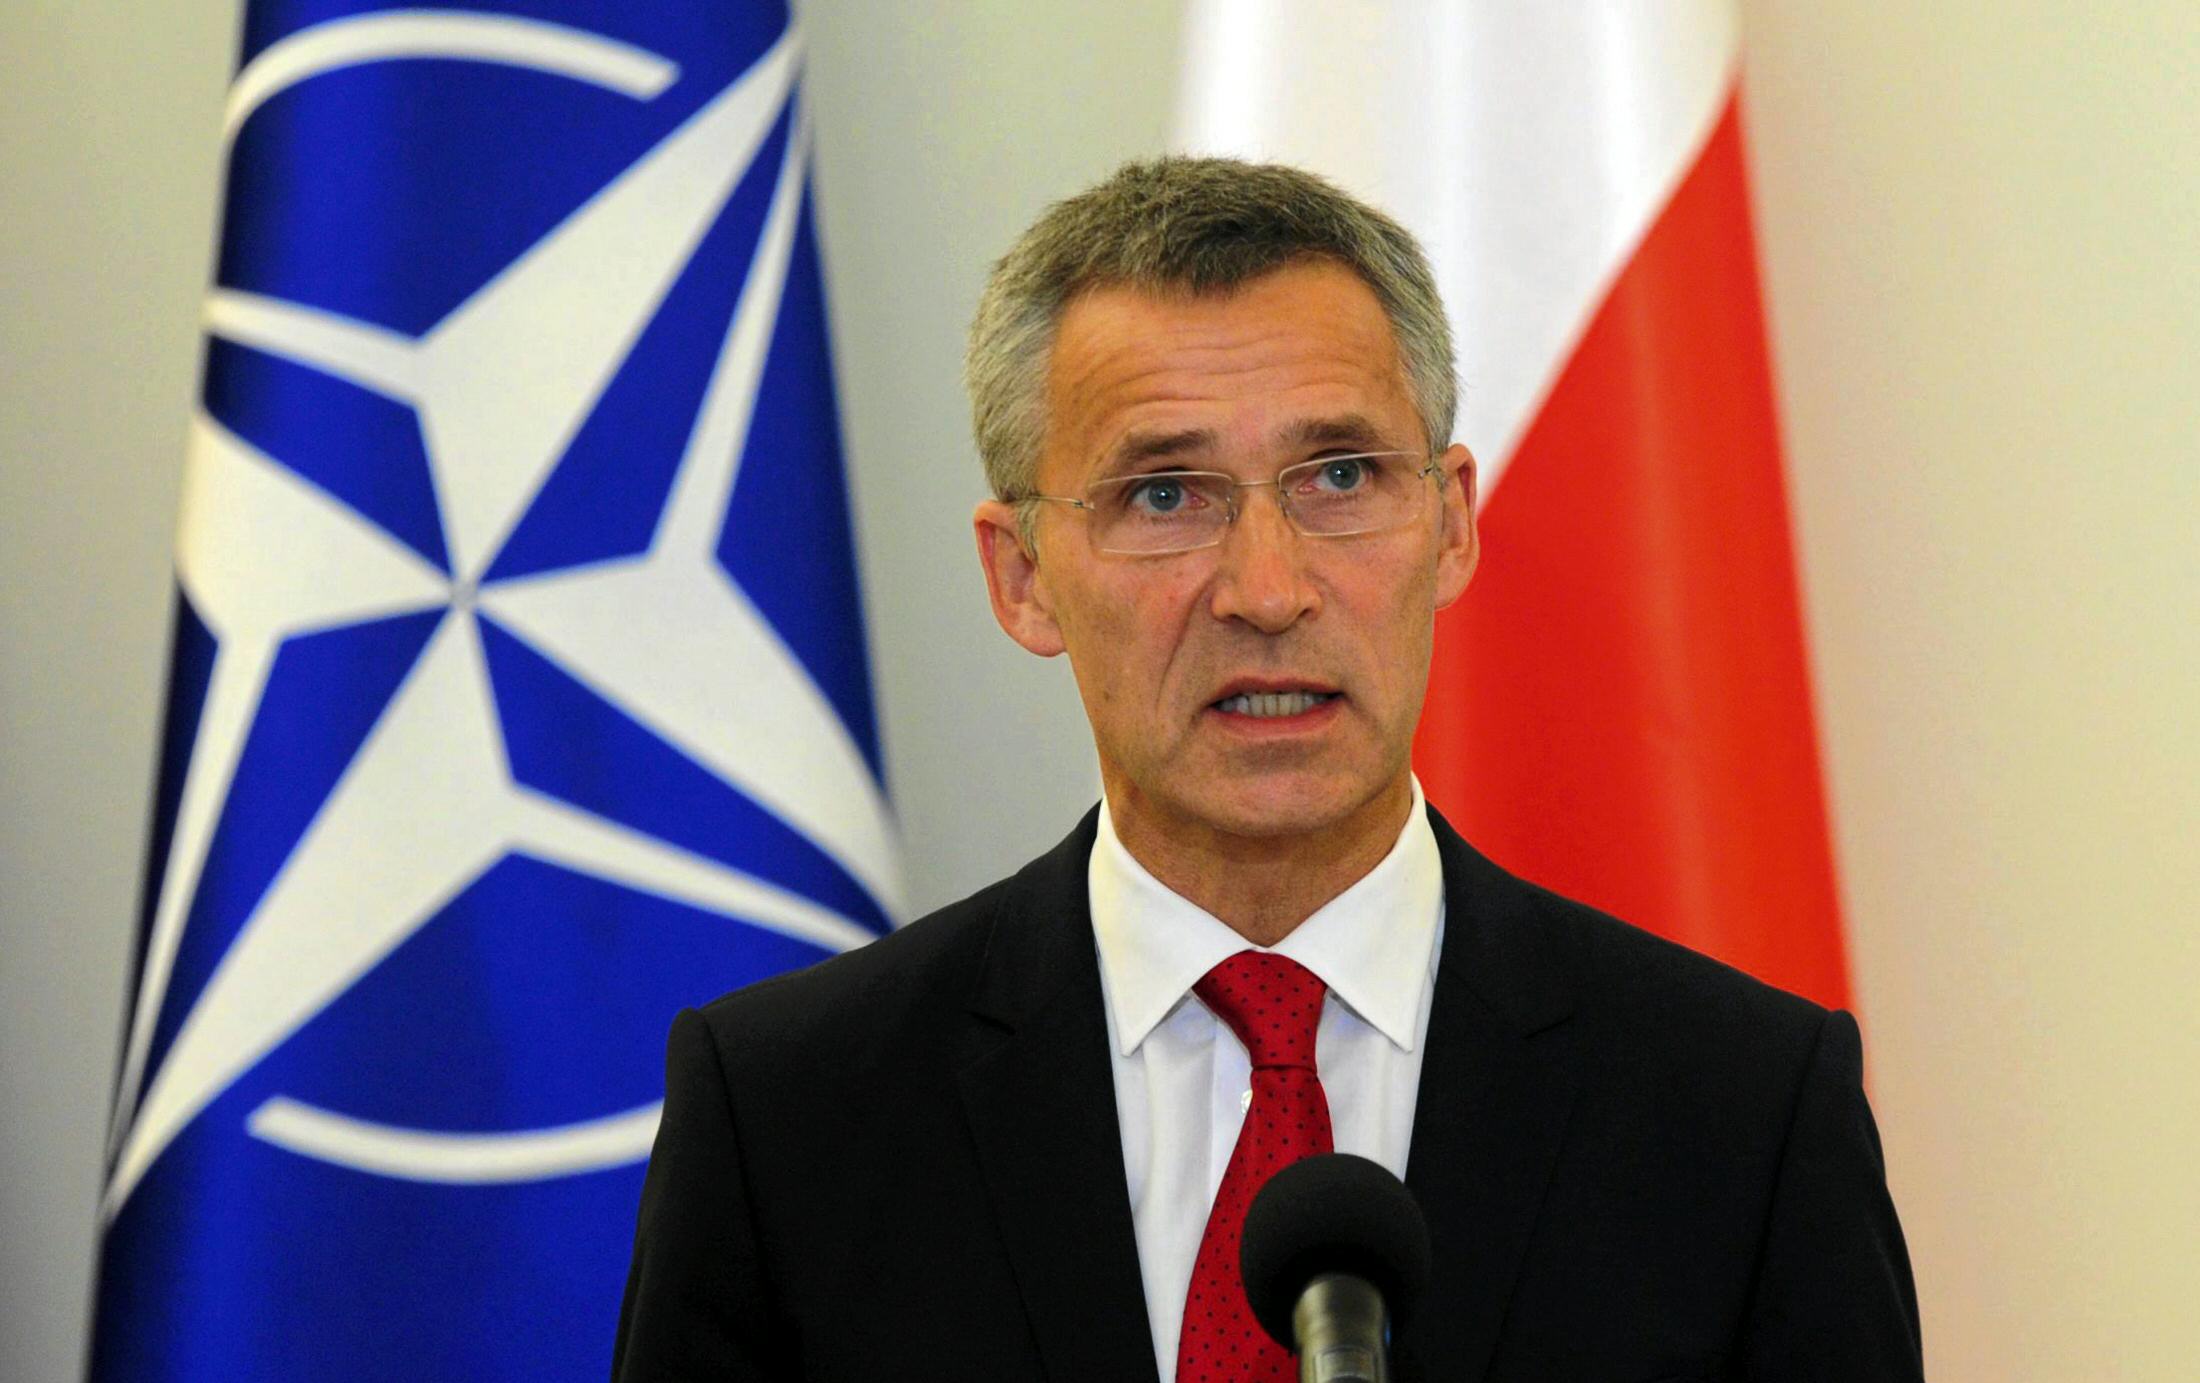 Going it alone is not an option for US or Europe, says NATO head